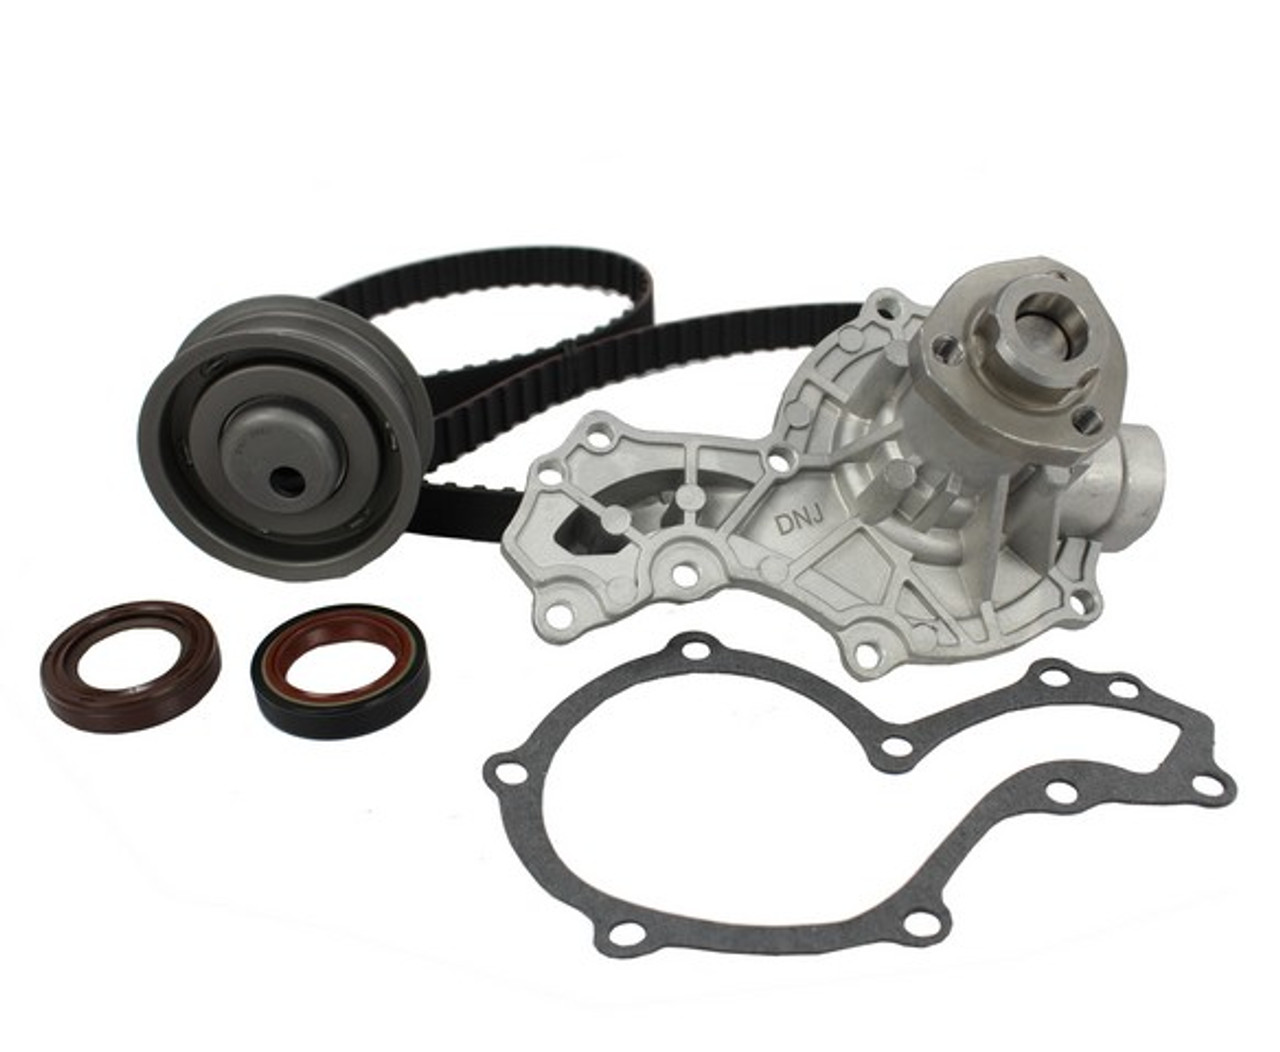 Timing Belt Kit with Water Pump 2.0L 1994 Volkswagen Golf - TBK803WP.10